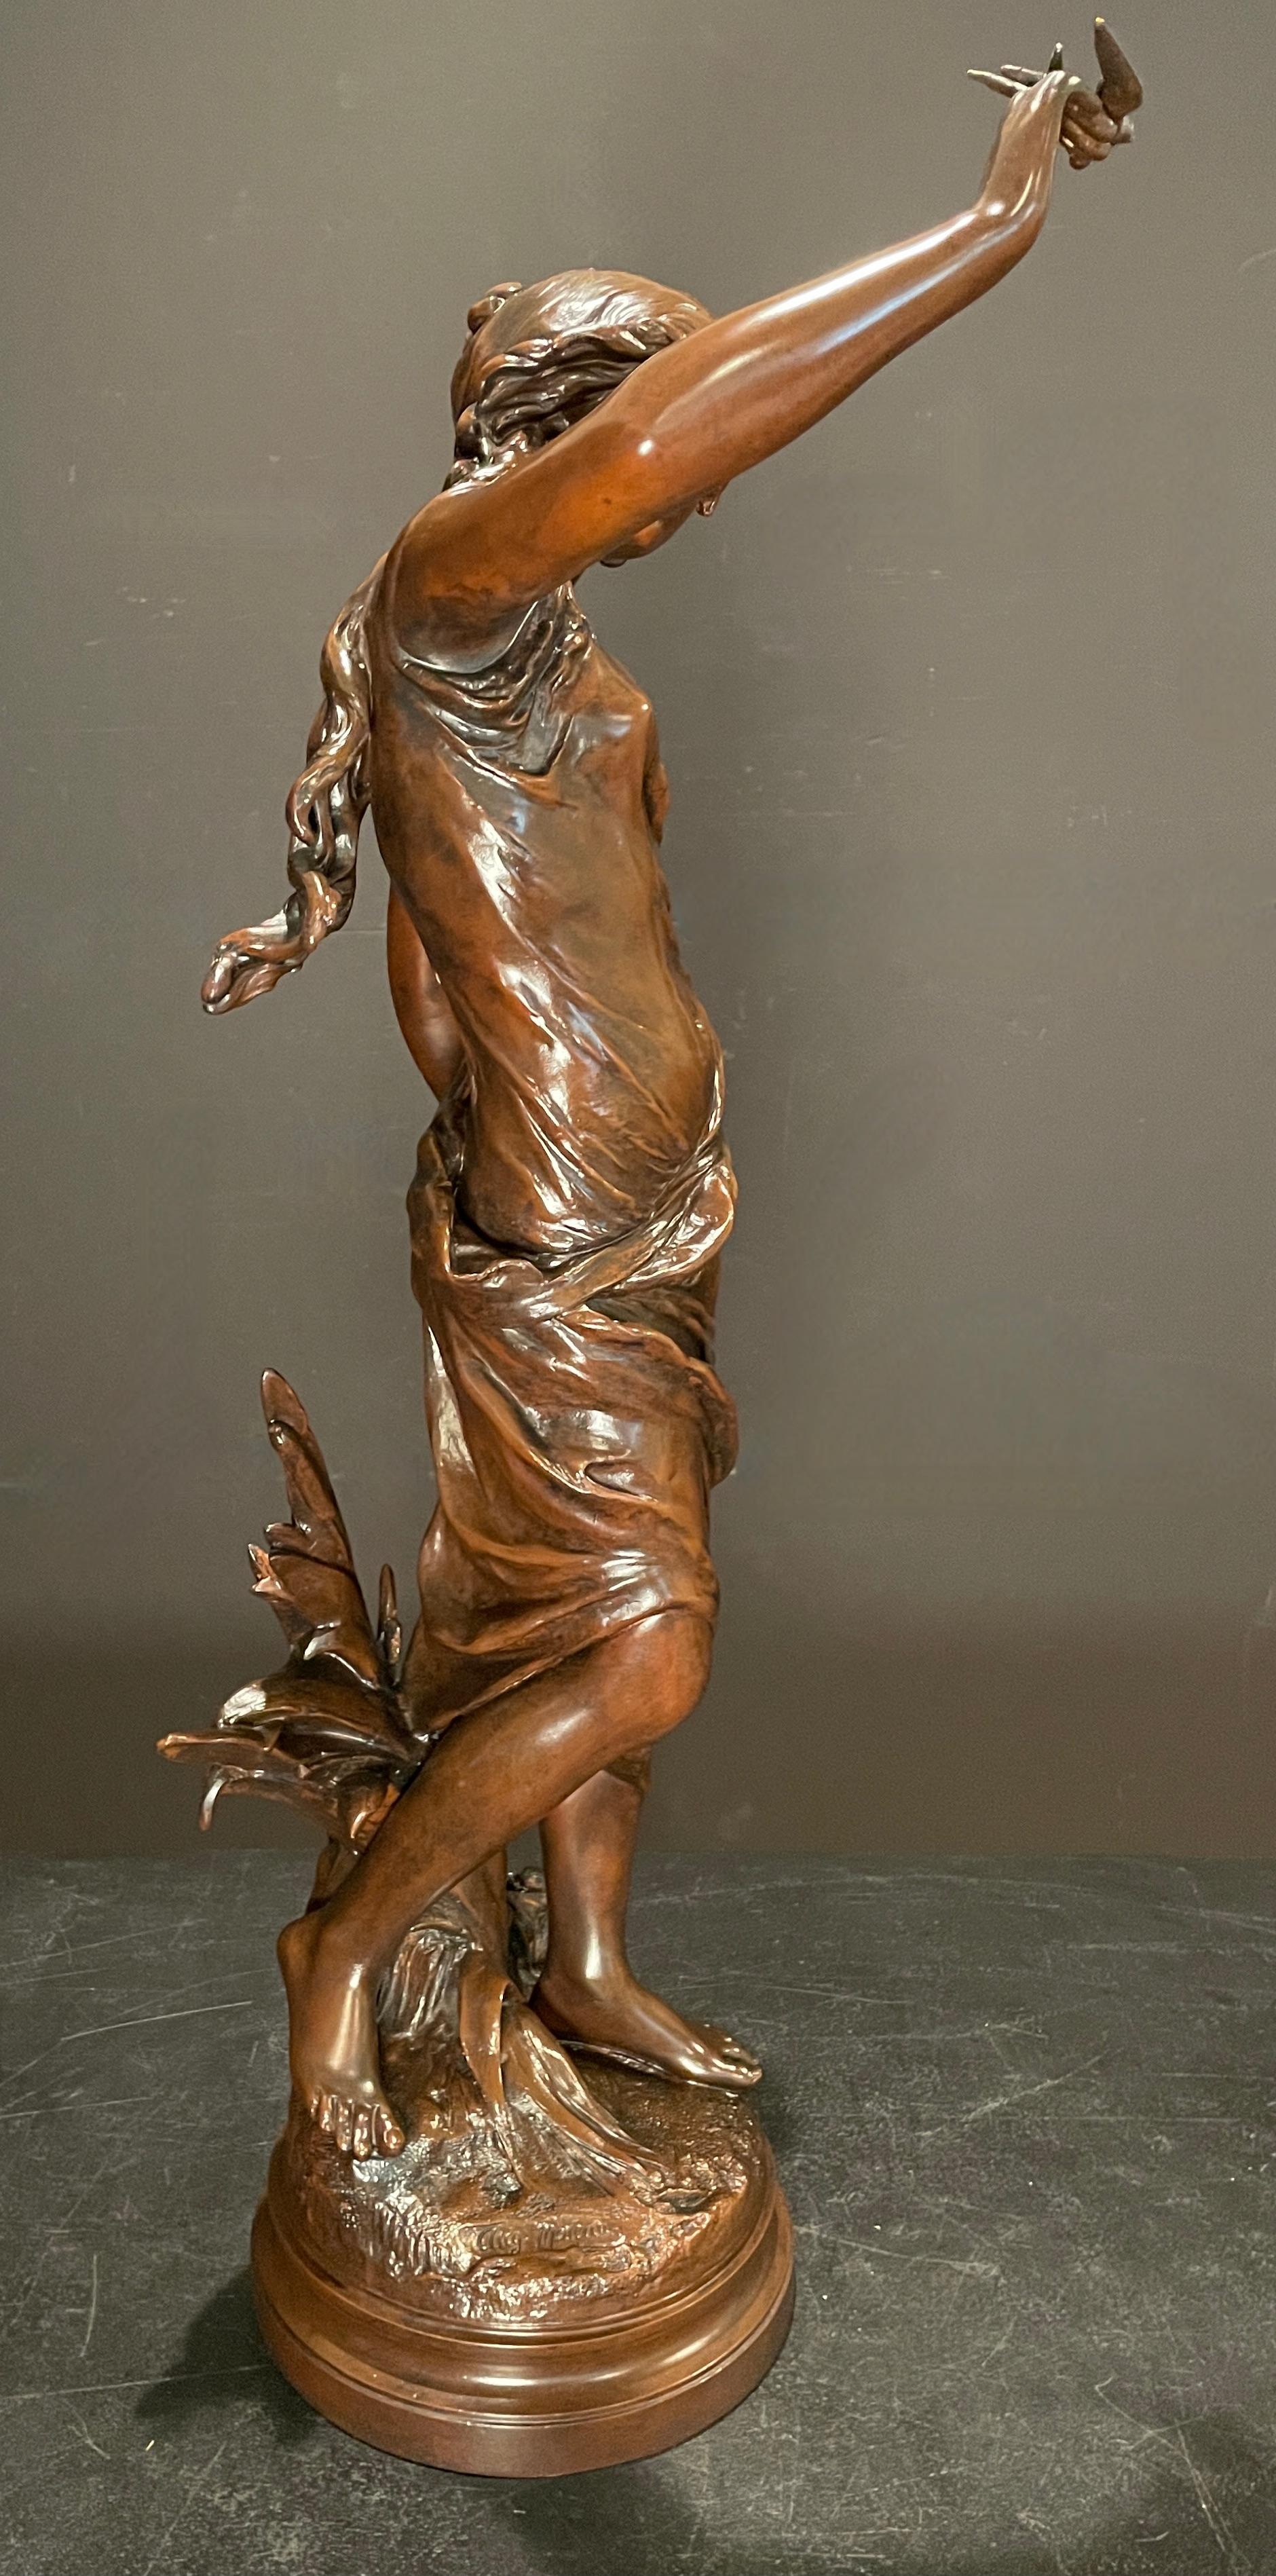 Large 19th century French sculpture by Auguste Moreau (1834-1917) depicting a young girl, on her hand rests a small love bird. Made of spelter, with a beautiful warm, rich chocolate brown patina. Signature on base: Auguste Moreau.